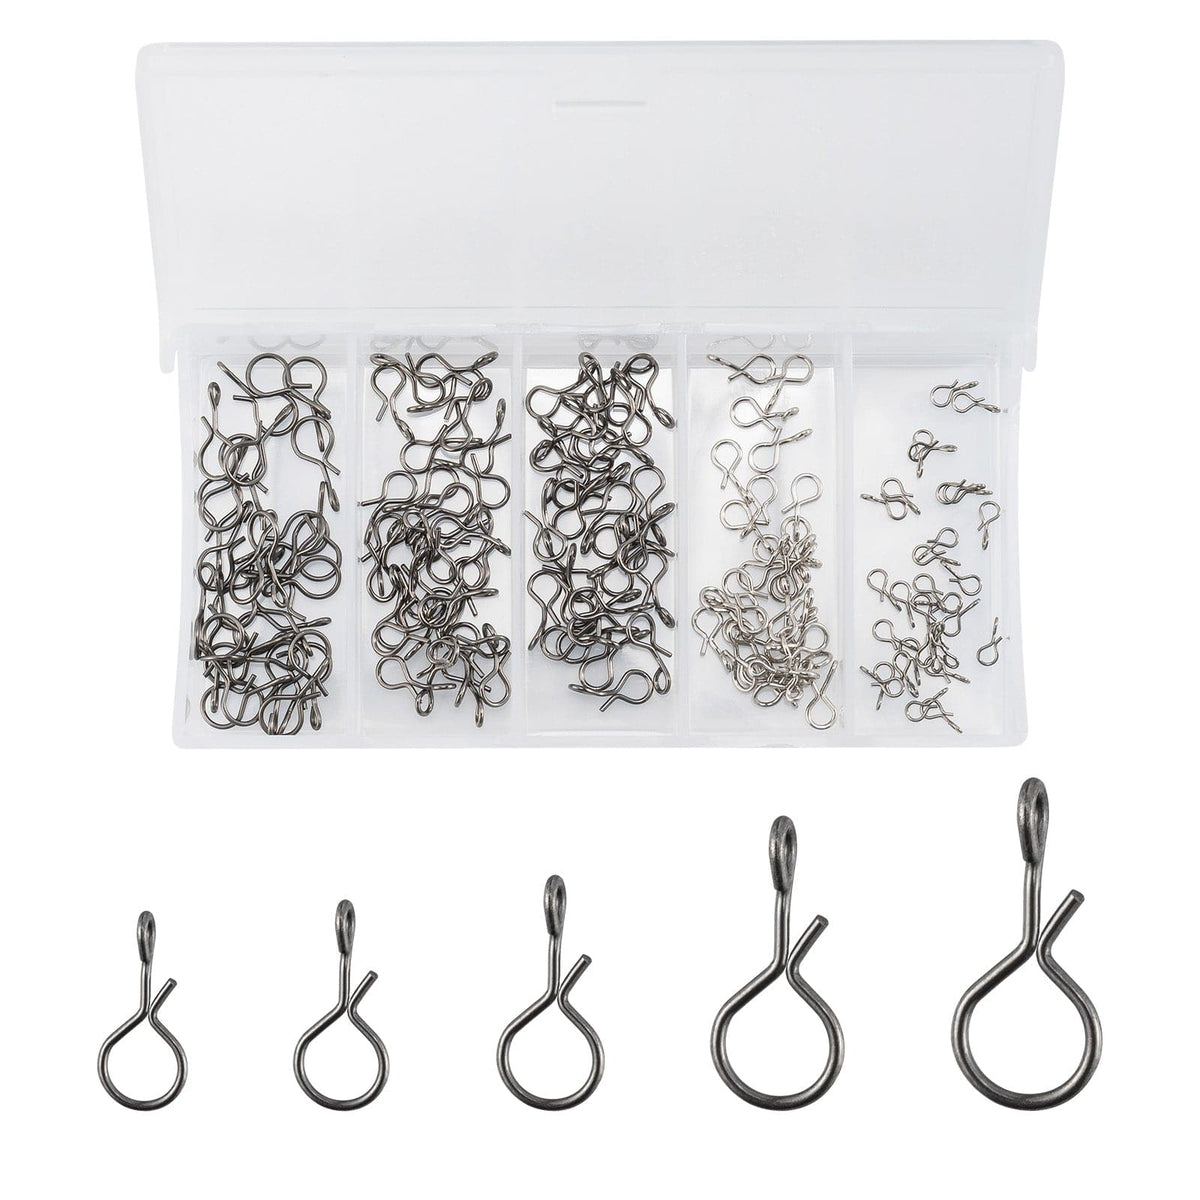 Fly Fishing Snaps Stainless Steel Quick Change Hooks - Dr.Fish